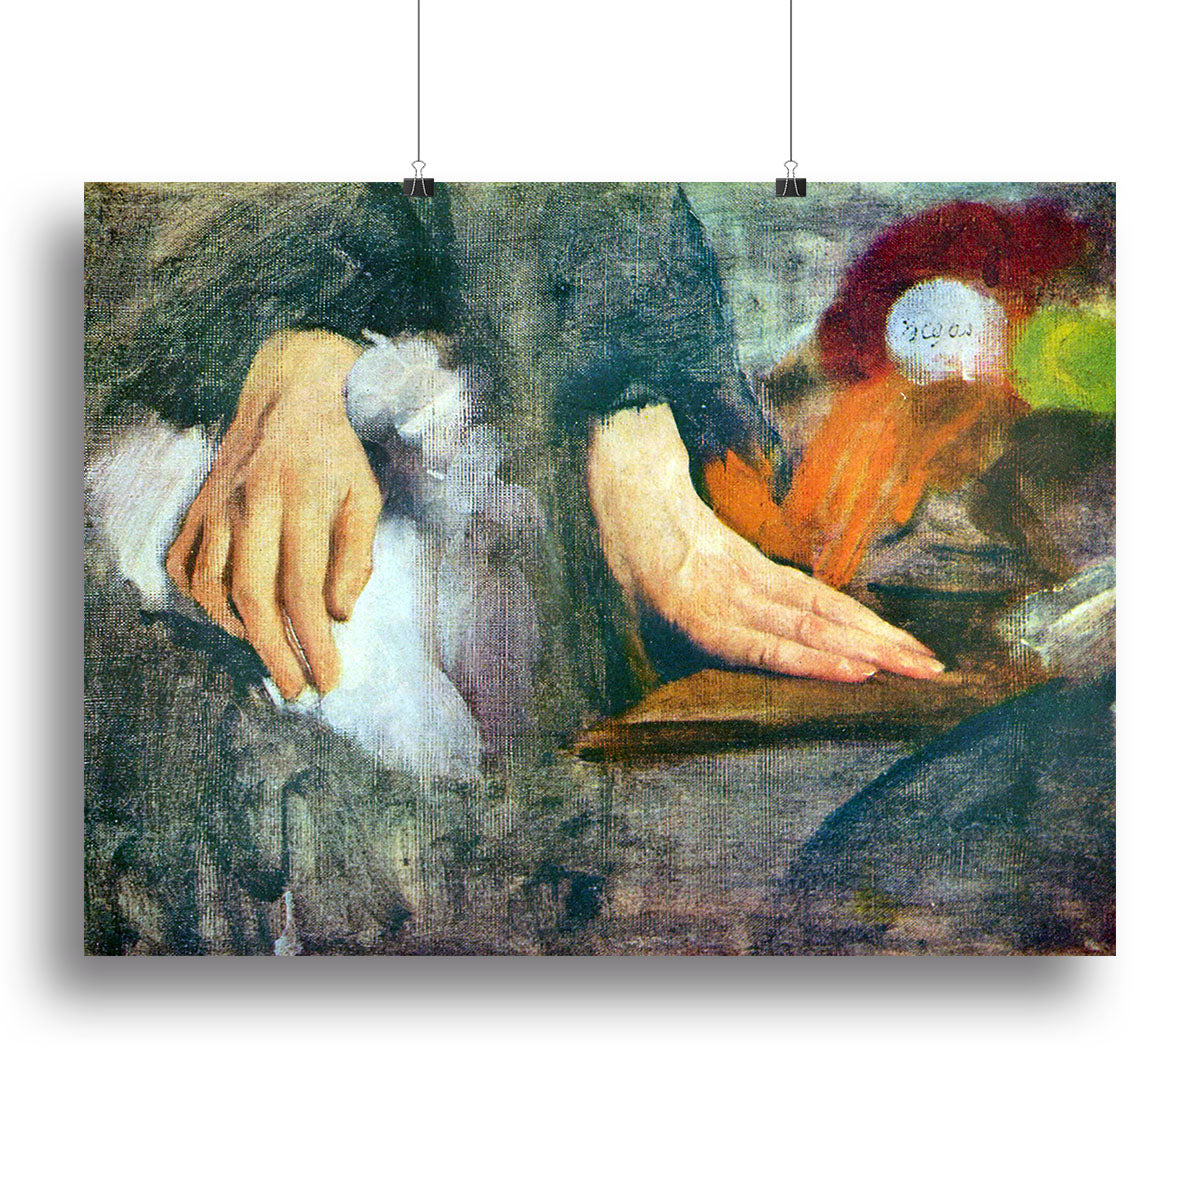 Hand Study by Degas Canvas Print or Poster - Canvas Art Rocks - 2